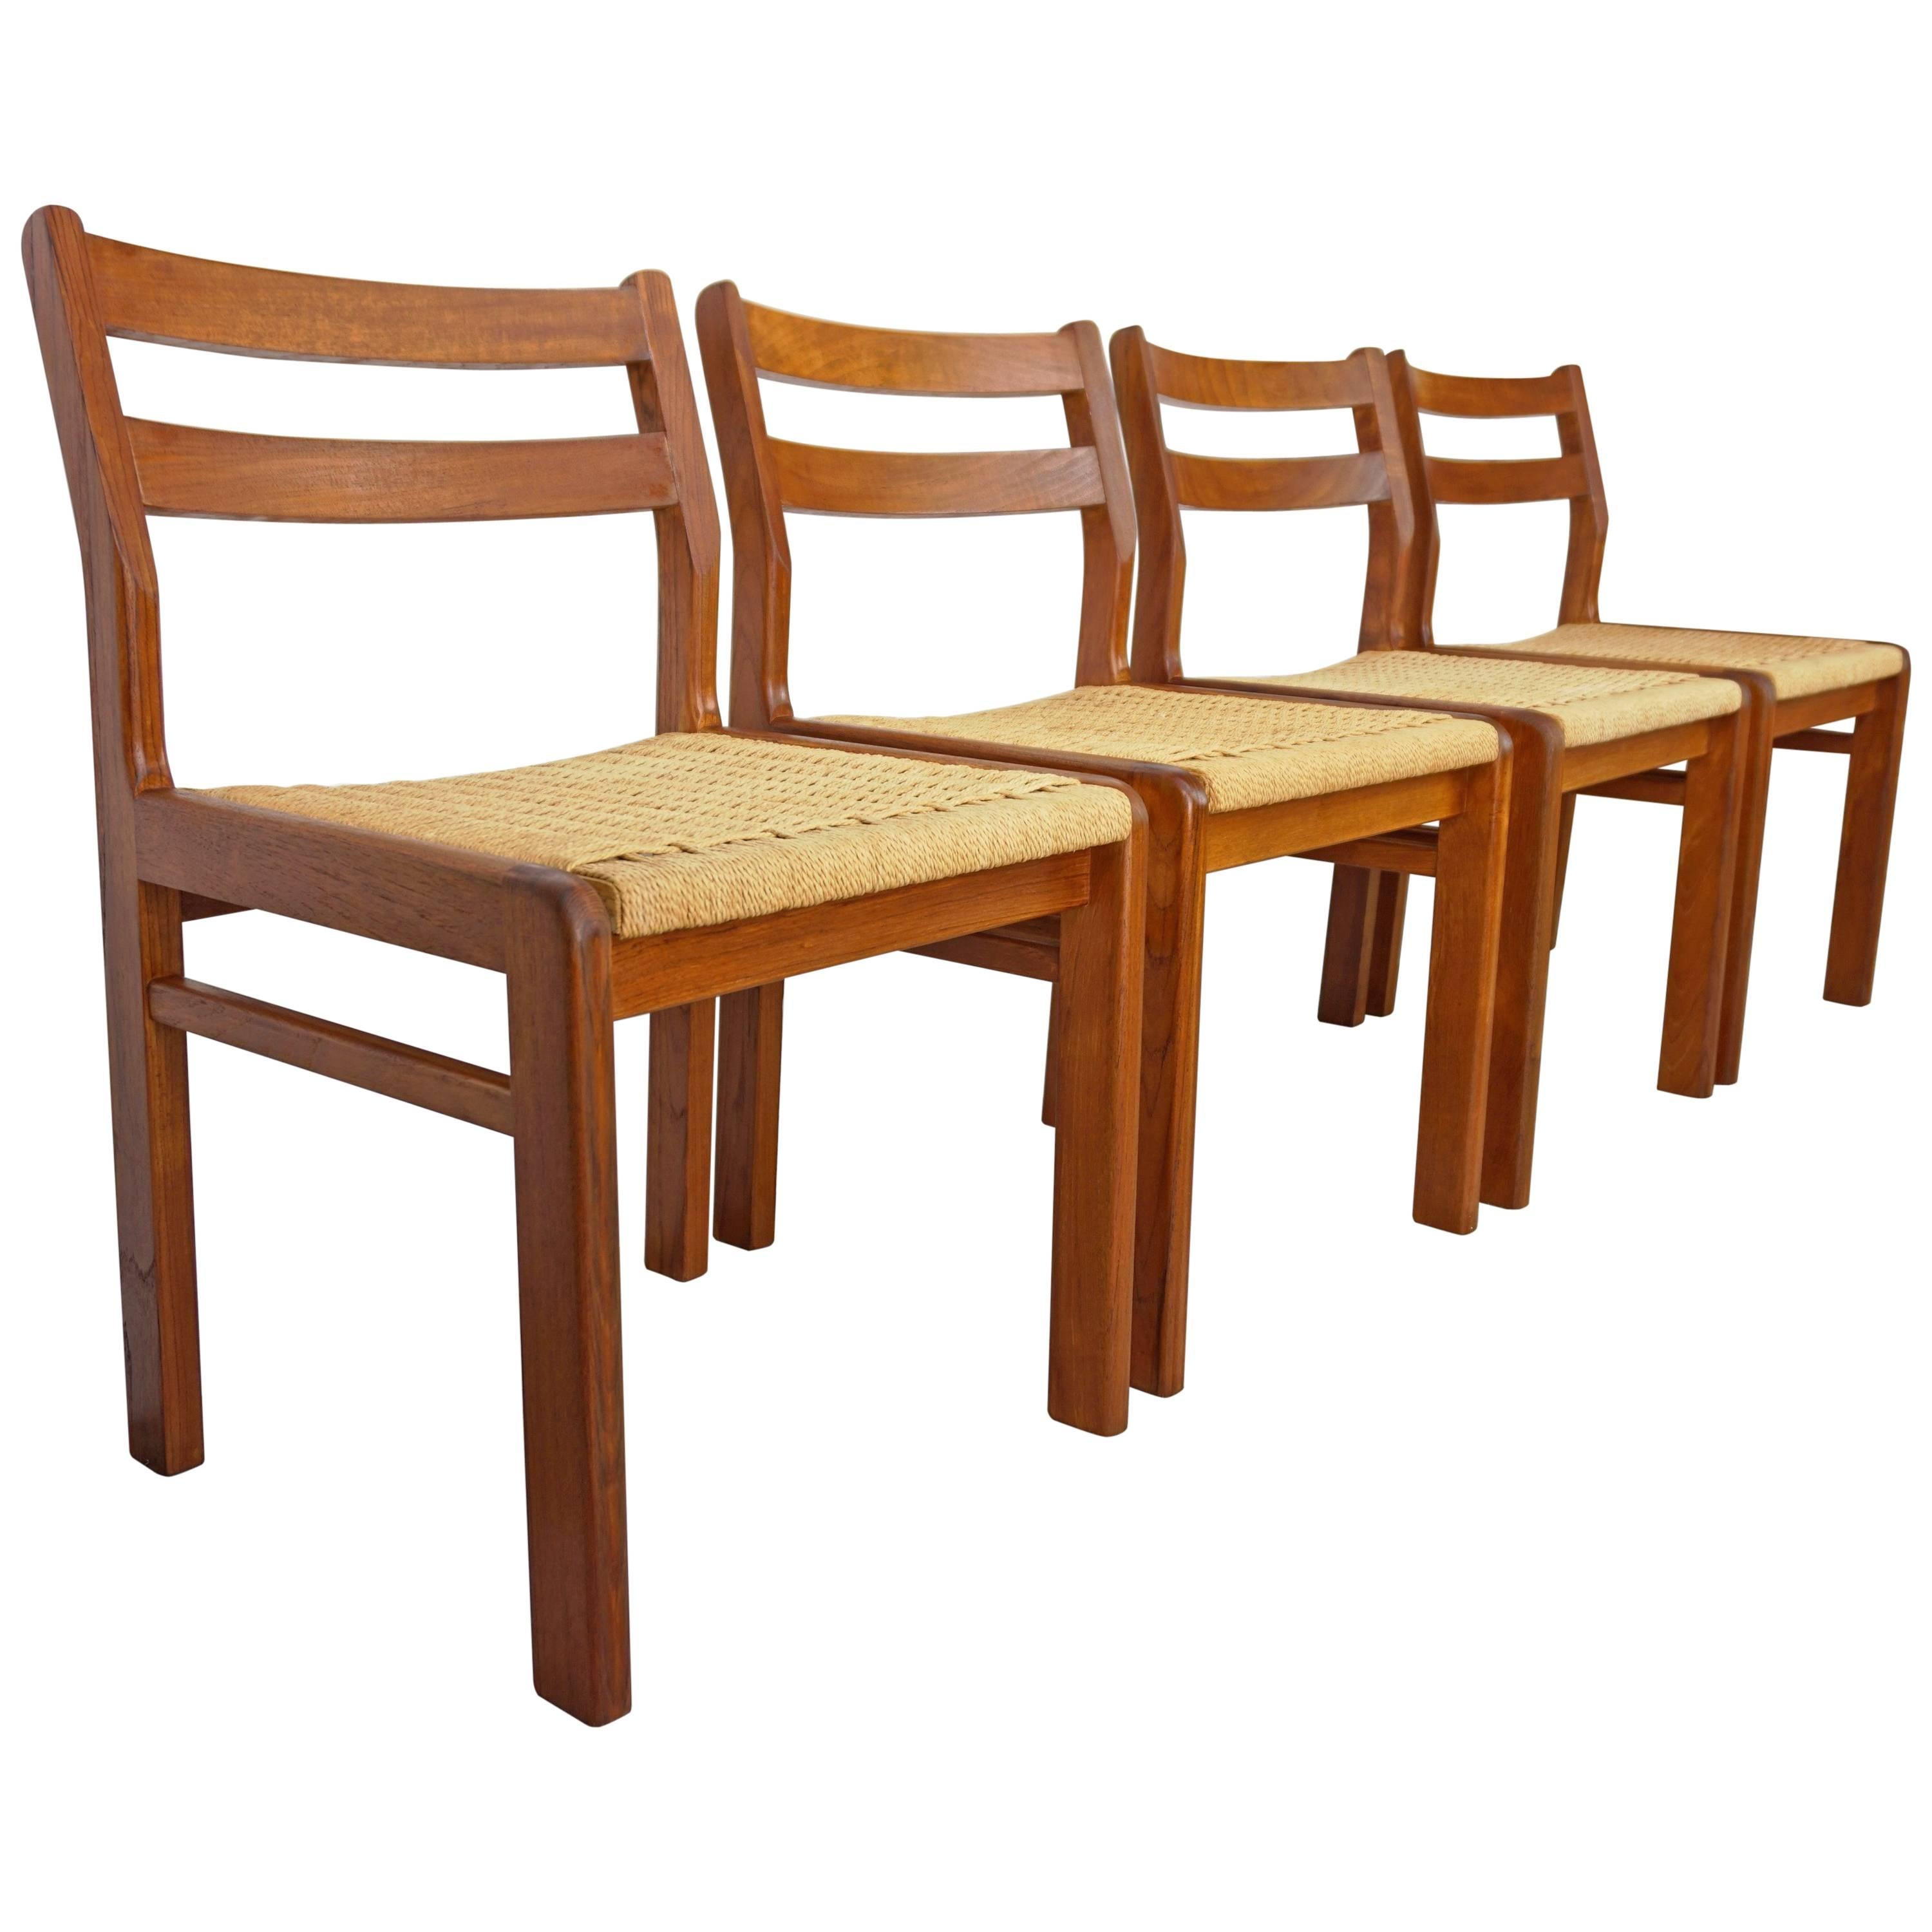 Set of Four Danish 1960s Design Wooden Teak and Rope Chairs